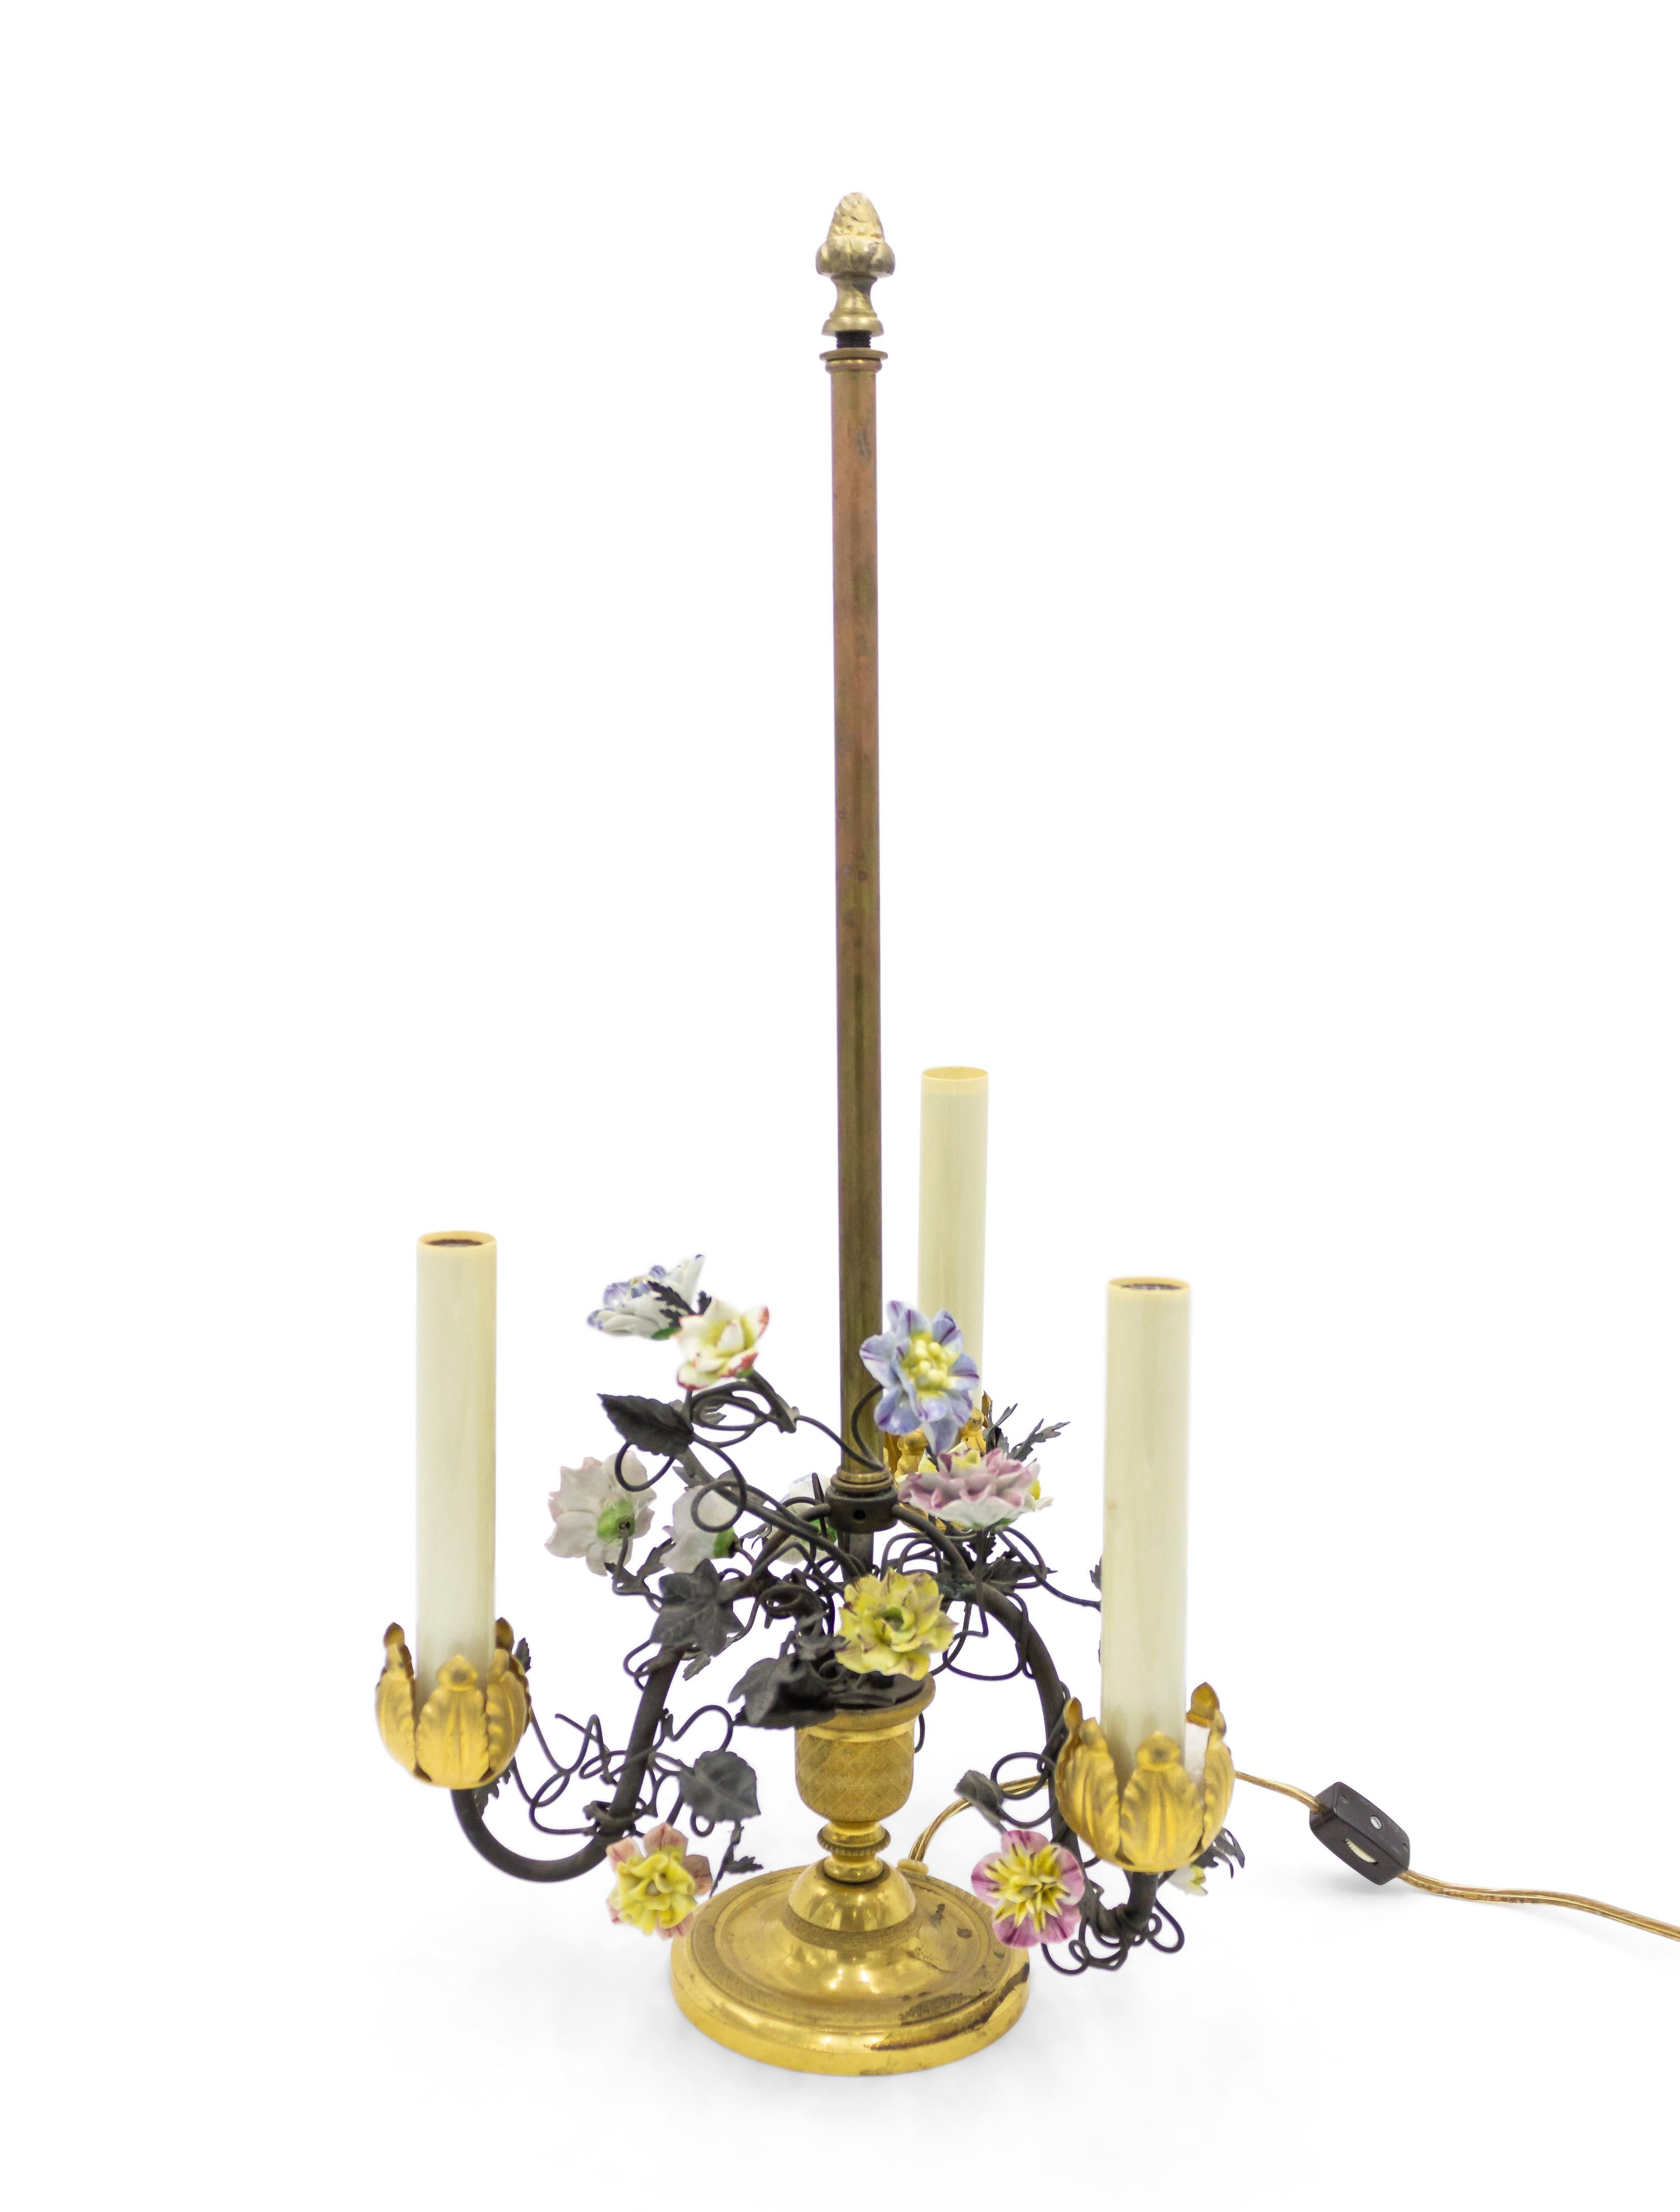 Pair of French Victorian 19th-20th century three-light lamps with metal foliate arms and porcelain flowers on a round bronze base.